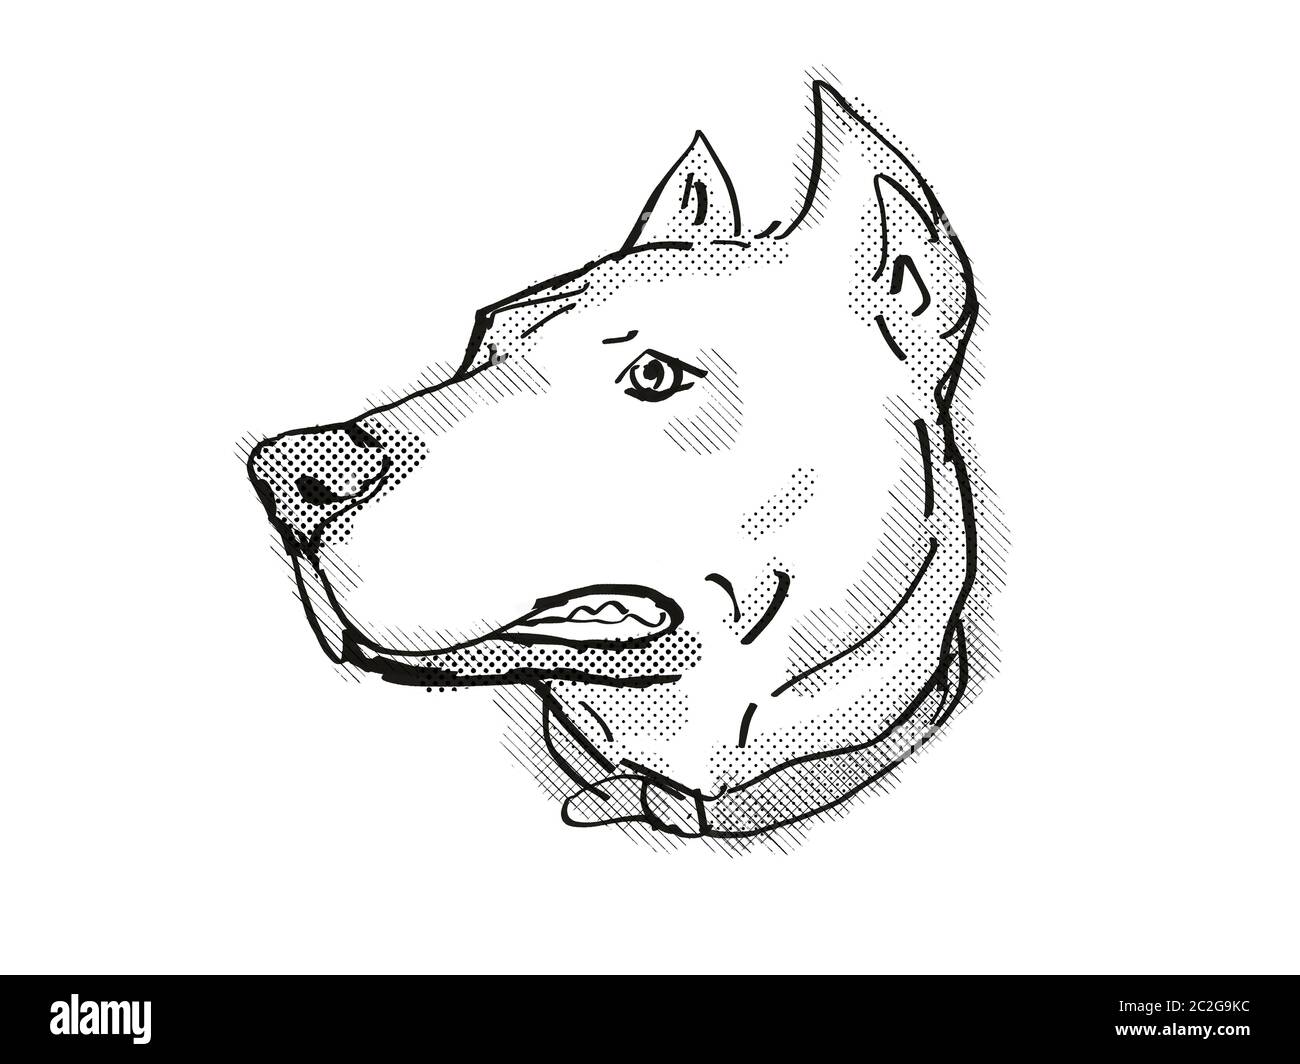 Retro cartoon style drawing of head of a Dogo Argentino, sometimes called the Argentinian Mastiff or the Argentine Dogo, a domestic dog breed on isola Stock Photo